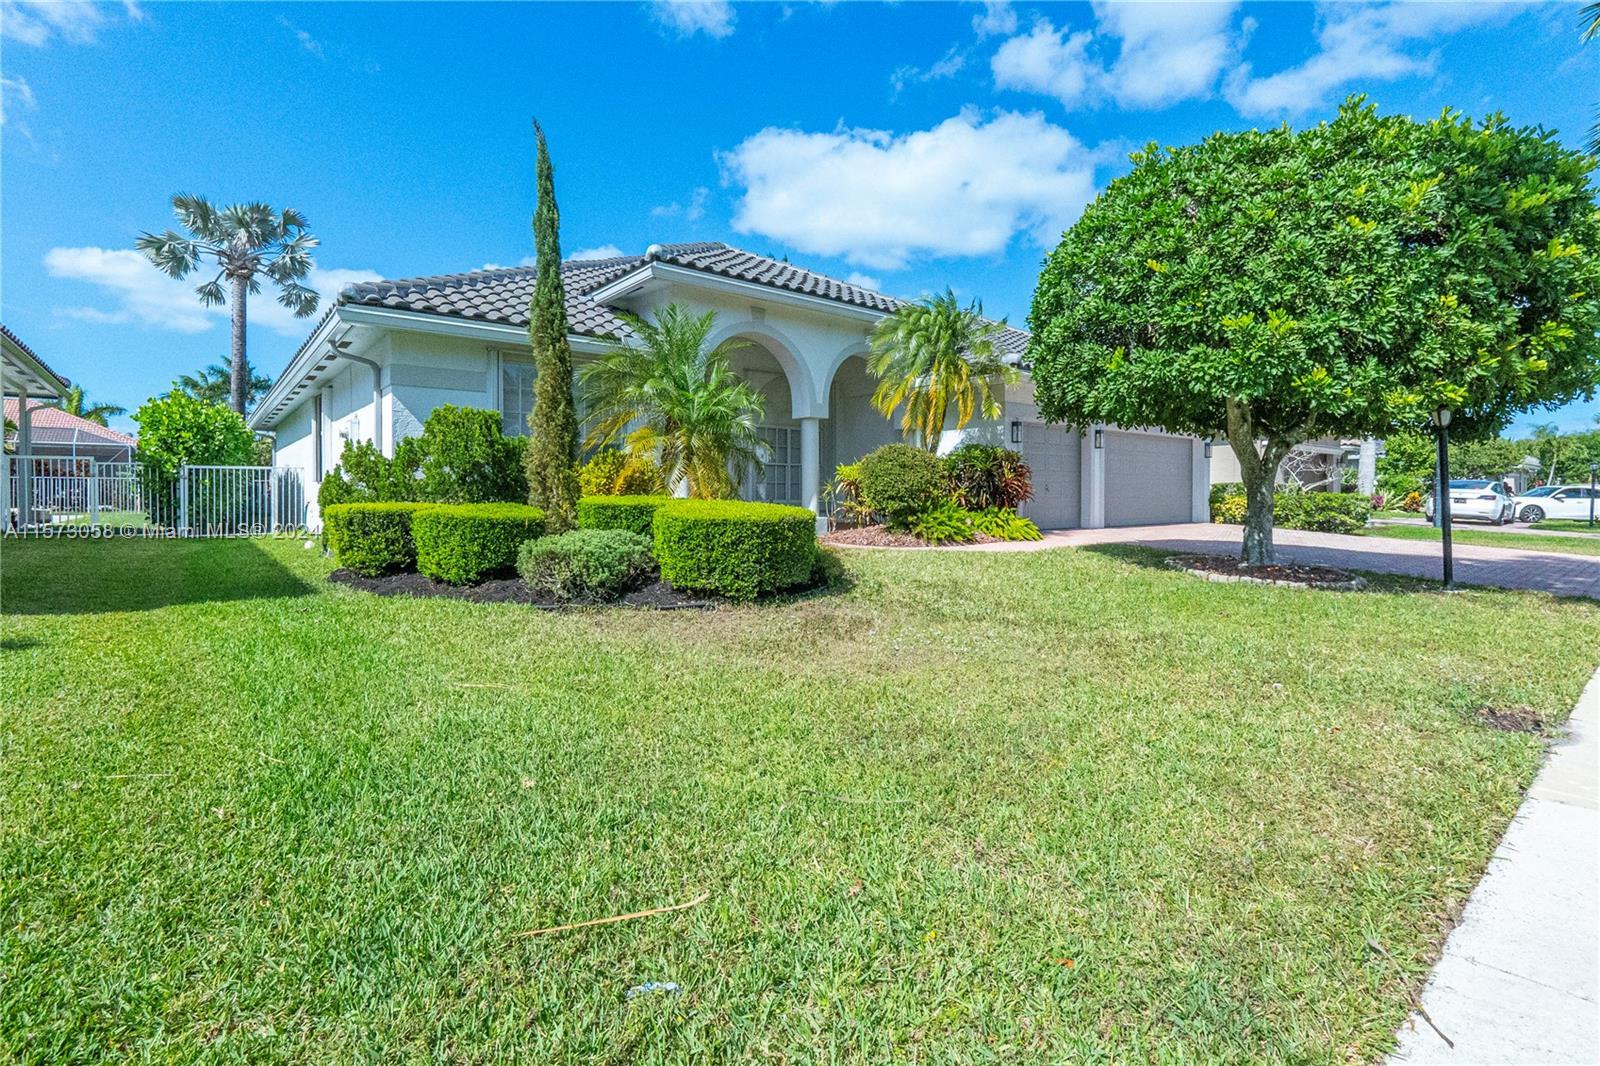 Located in the prestigious Boca Falls community, this stunning 4BR/3BA home offers luxury and a fami